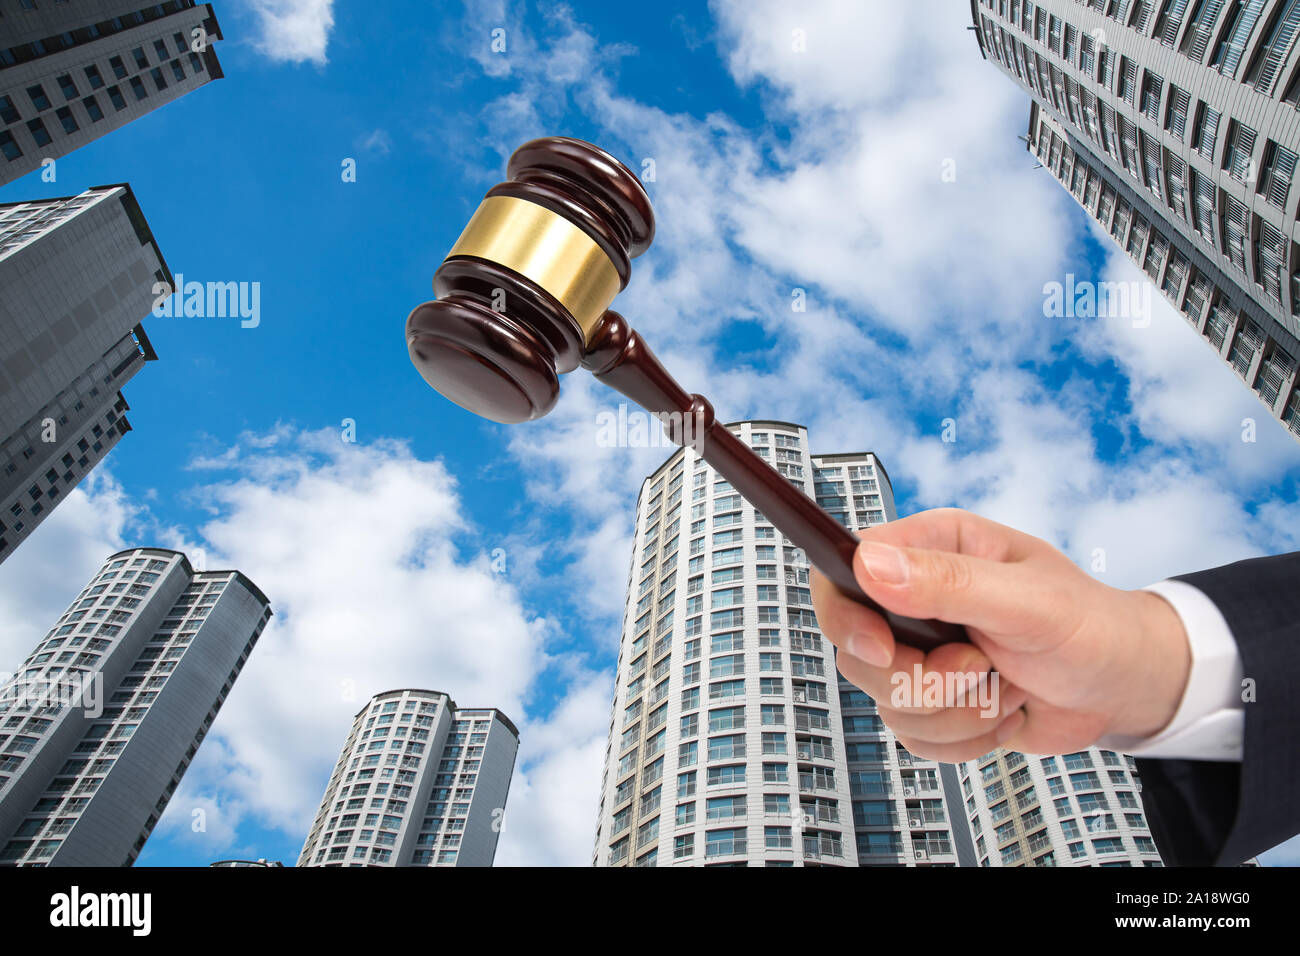 Hand of a businessman holding a judge gavel on the building background. Auction or bankruptcy concept. Stock Photo